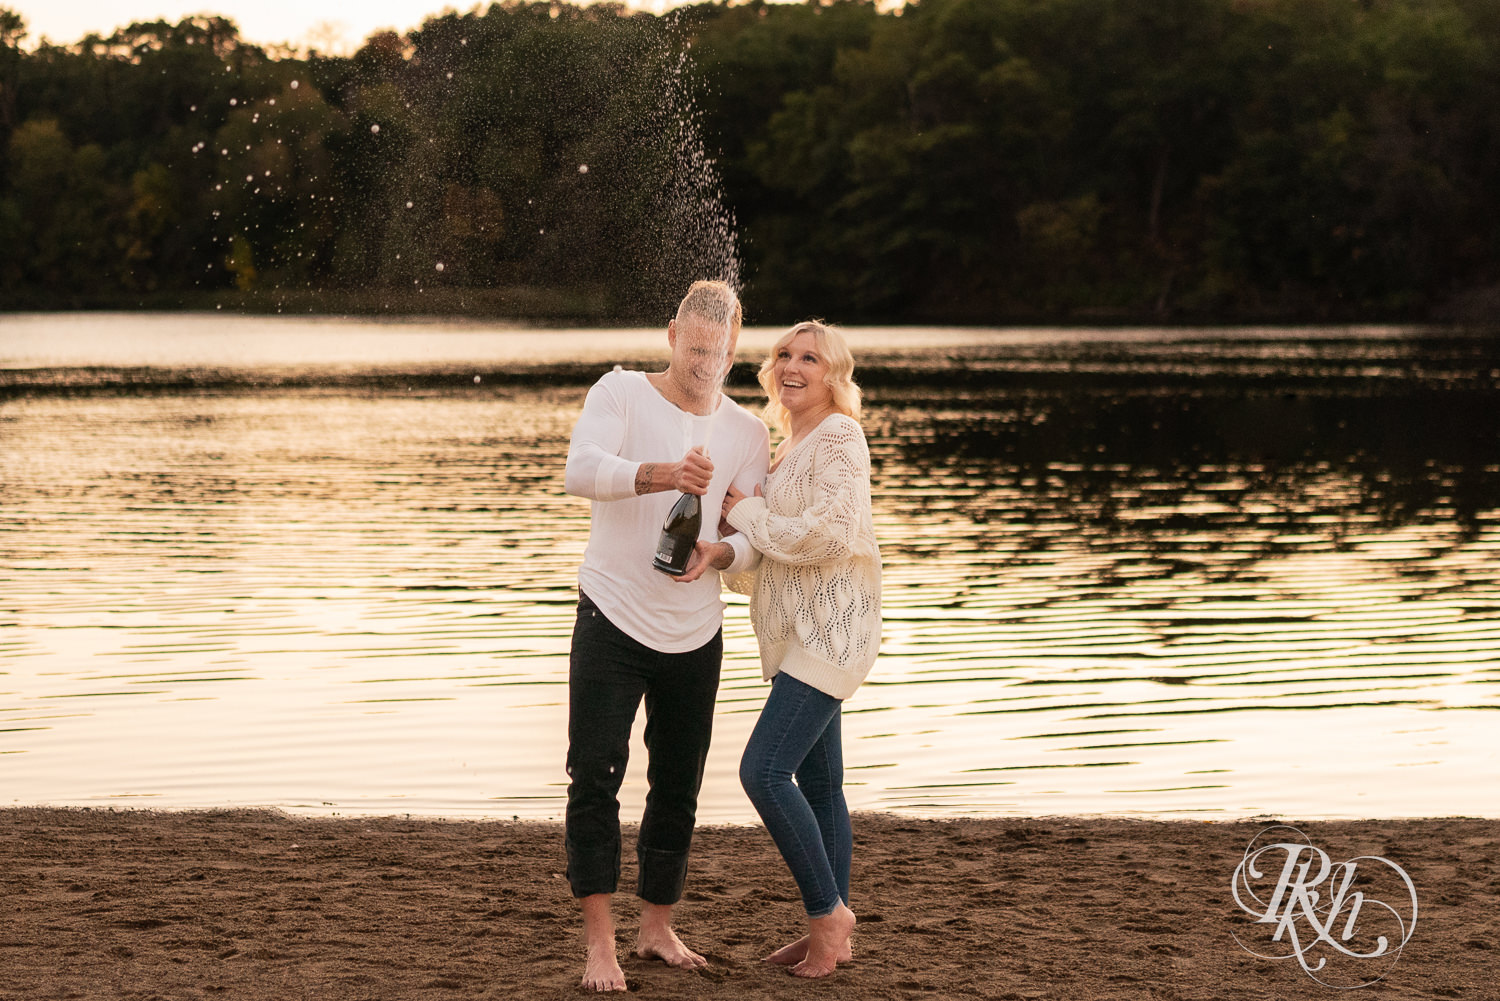 Blond woman and man in white shirts and jeans spray champagne on the beach at Lebanon Hills Regional Park in Eagan, Minnesota.